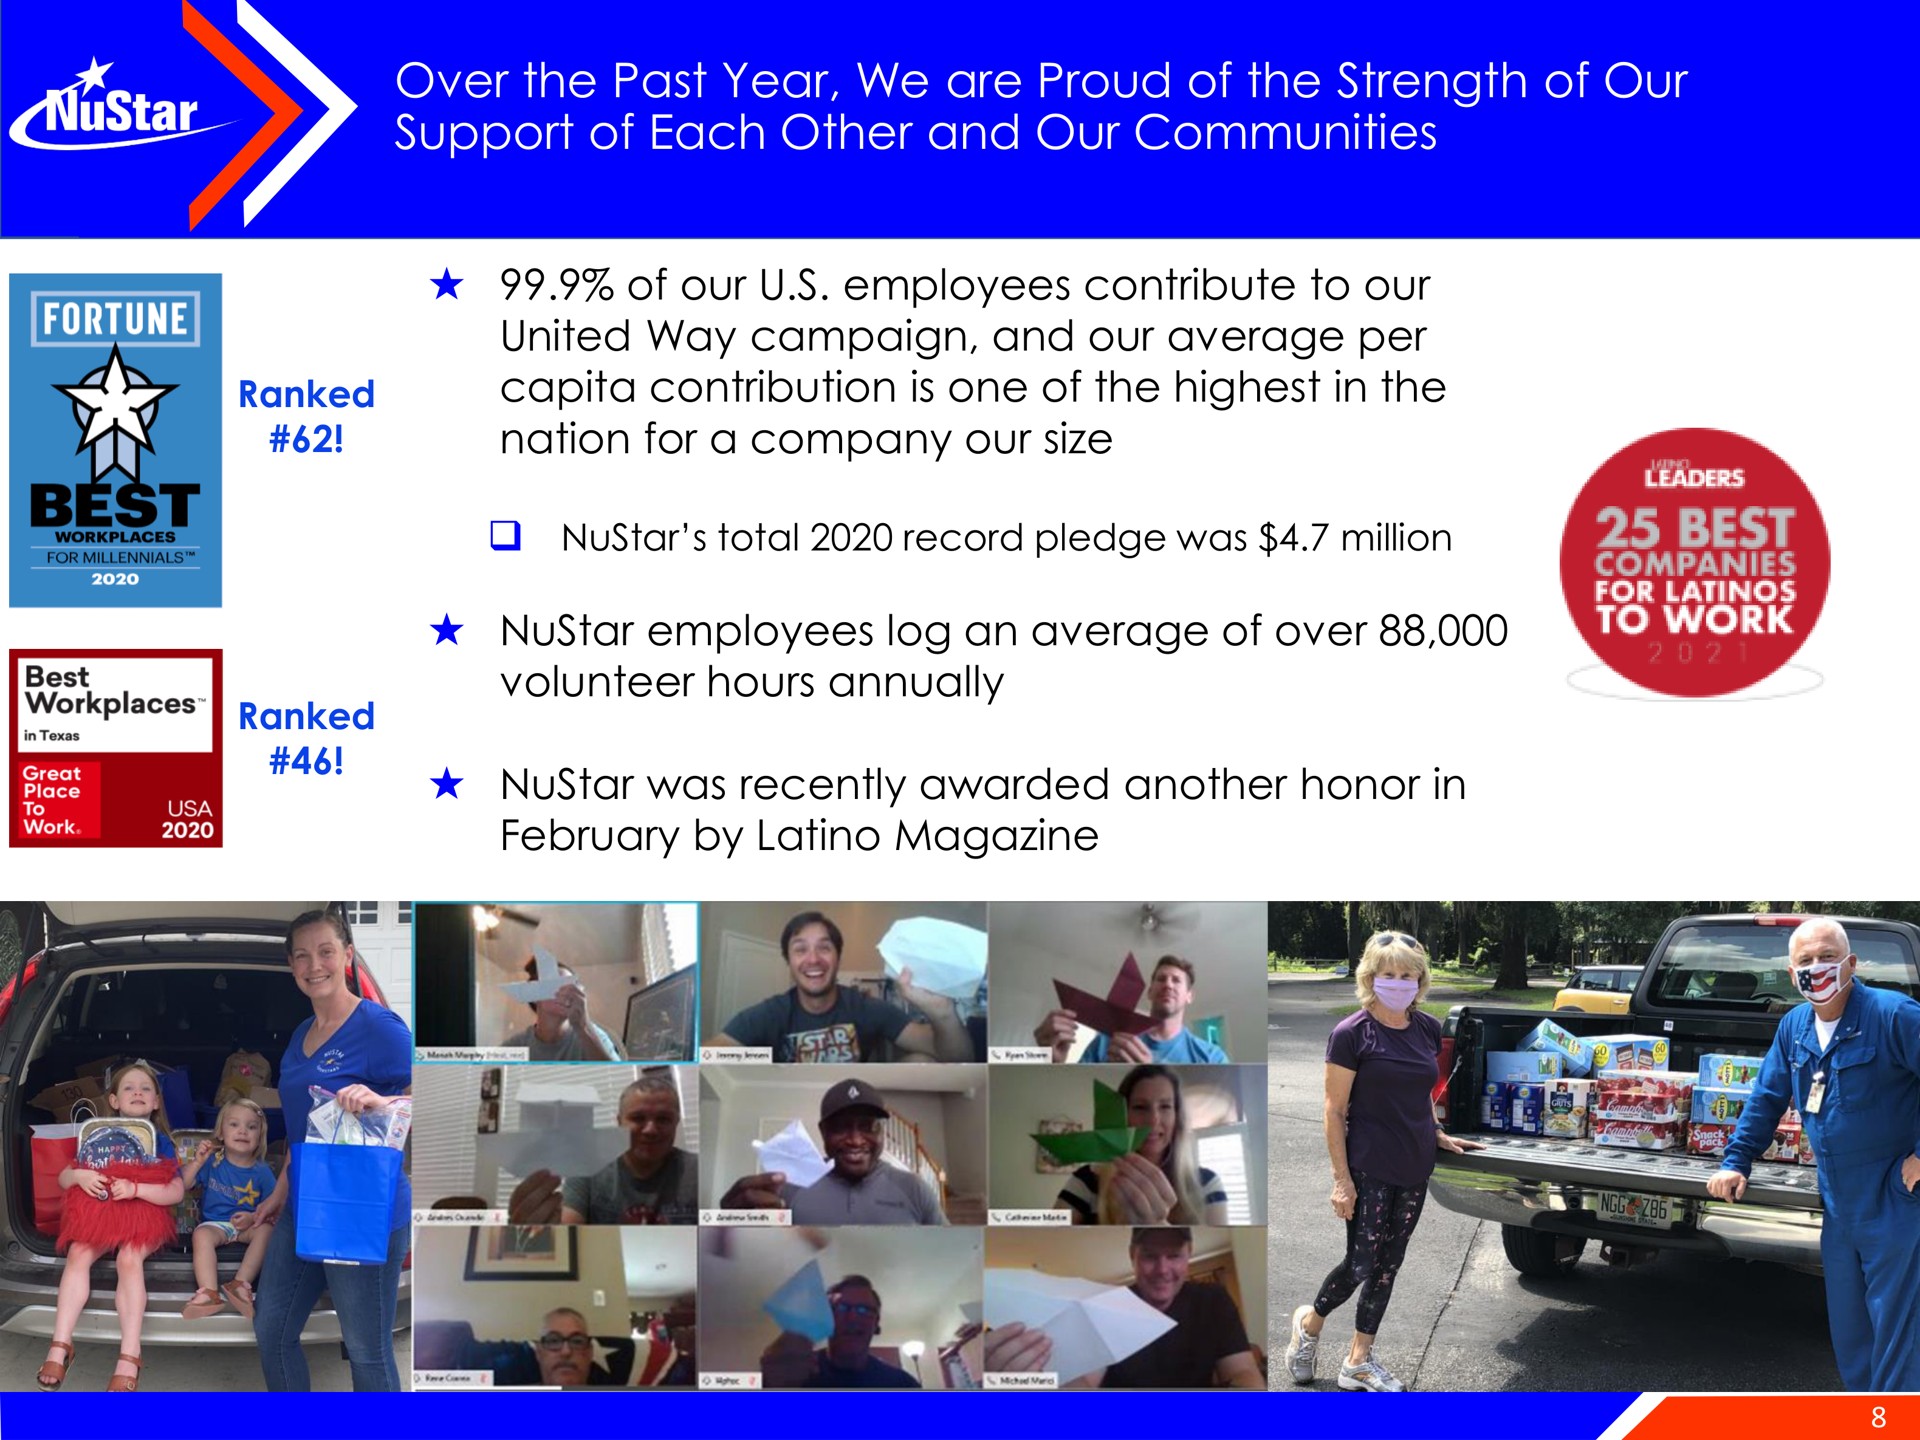 over the past year we are of the strength of our support of each other and our communities pier pat | NuStar Energy